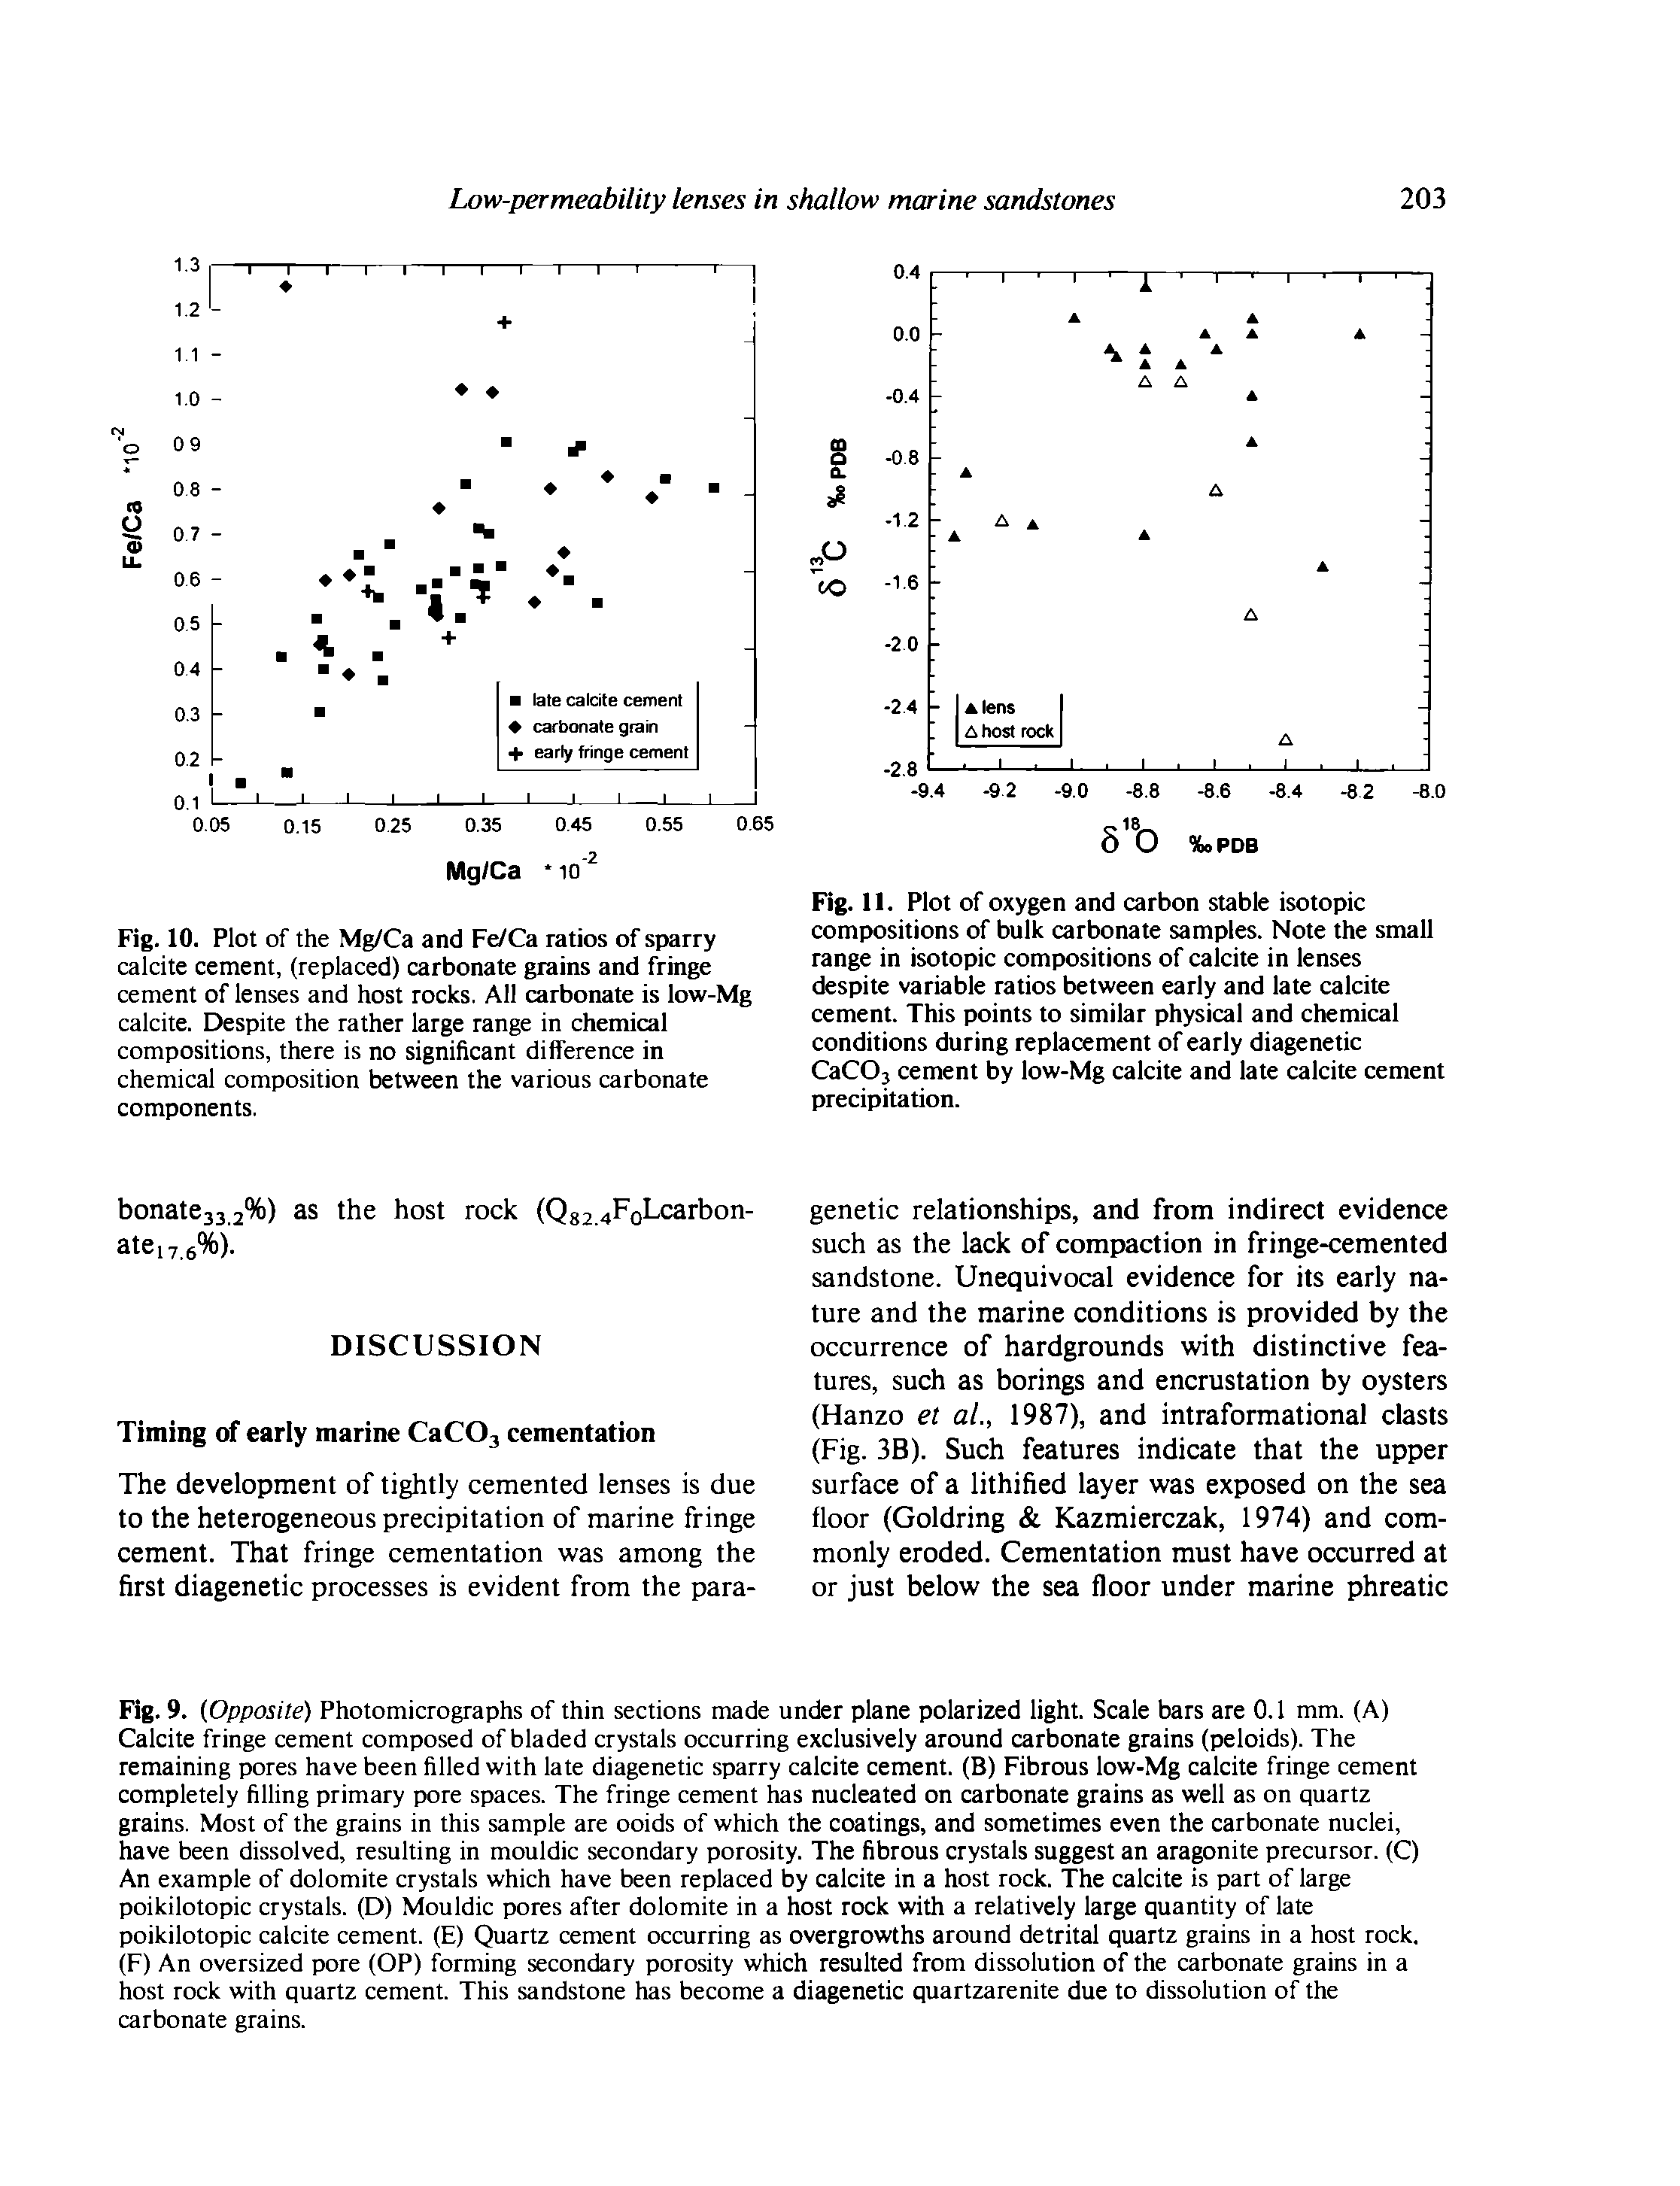 Fig. 10. Plot of the Mg/Ca and Fe/Ca ratios of sparry calcite cement, (replaced) carbonate grains and fringe cement of lenses and host rocks. All carbonate is low-Mg calcite. Despite the rather large range in chemical compositions, there is no significant difference in chemical composition between the various carbonate components.